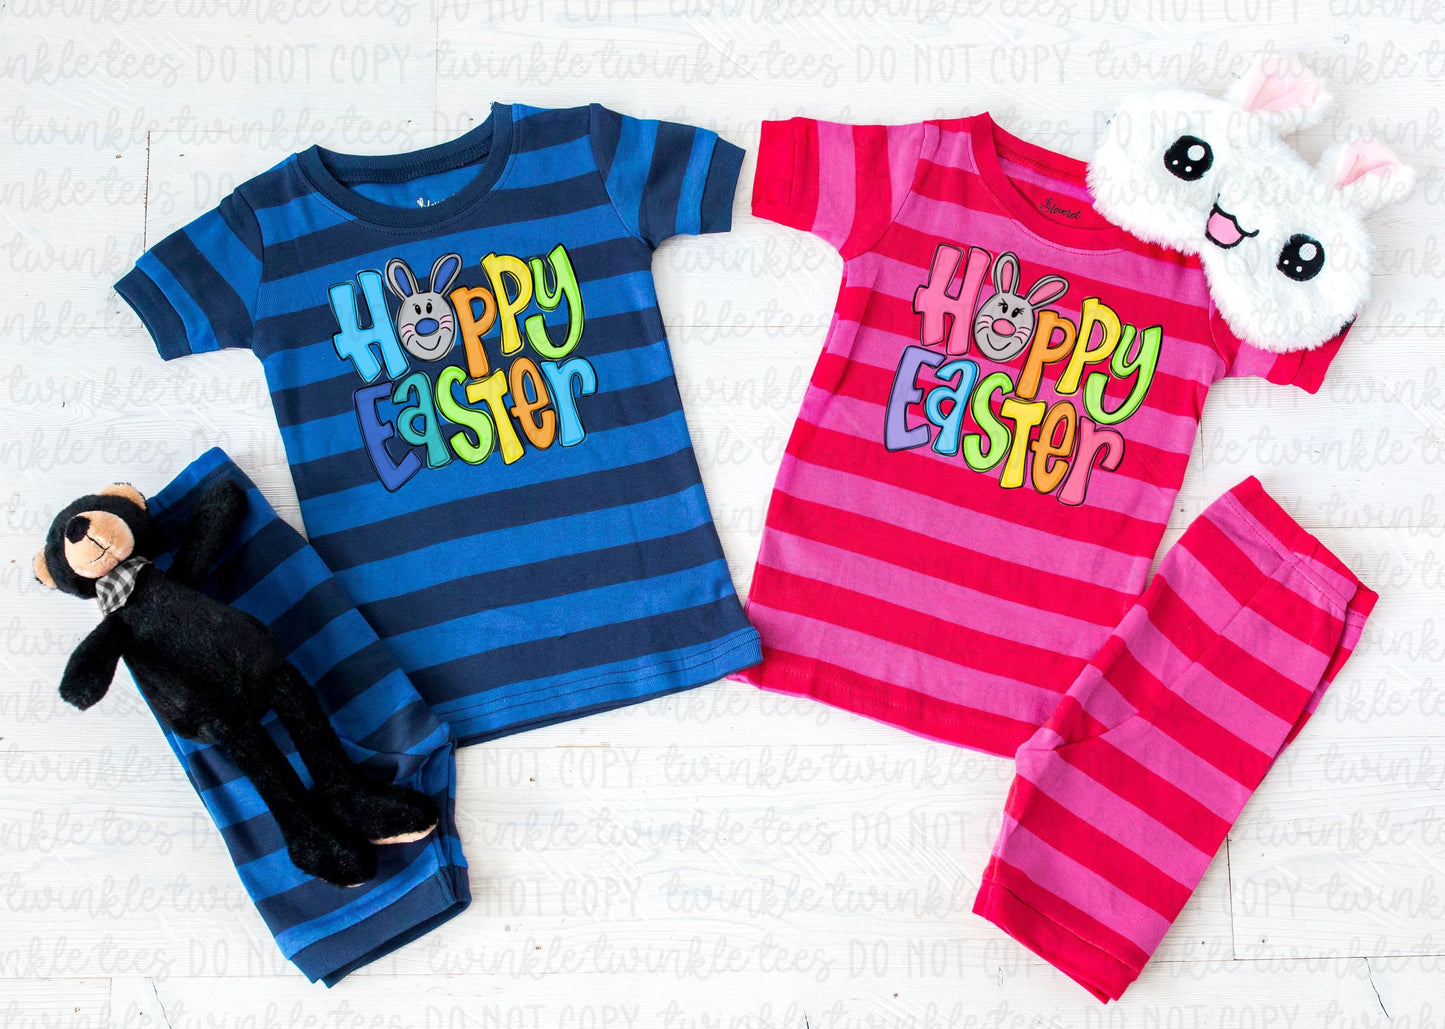 Happy Easter Pink and Blue Striped Shorts Pajamas, kids easter pajamas